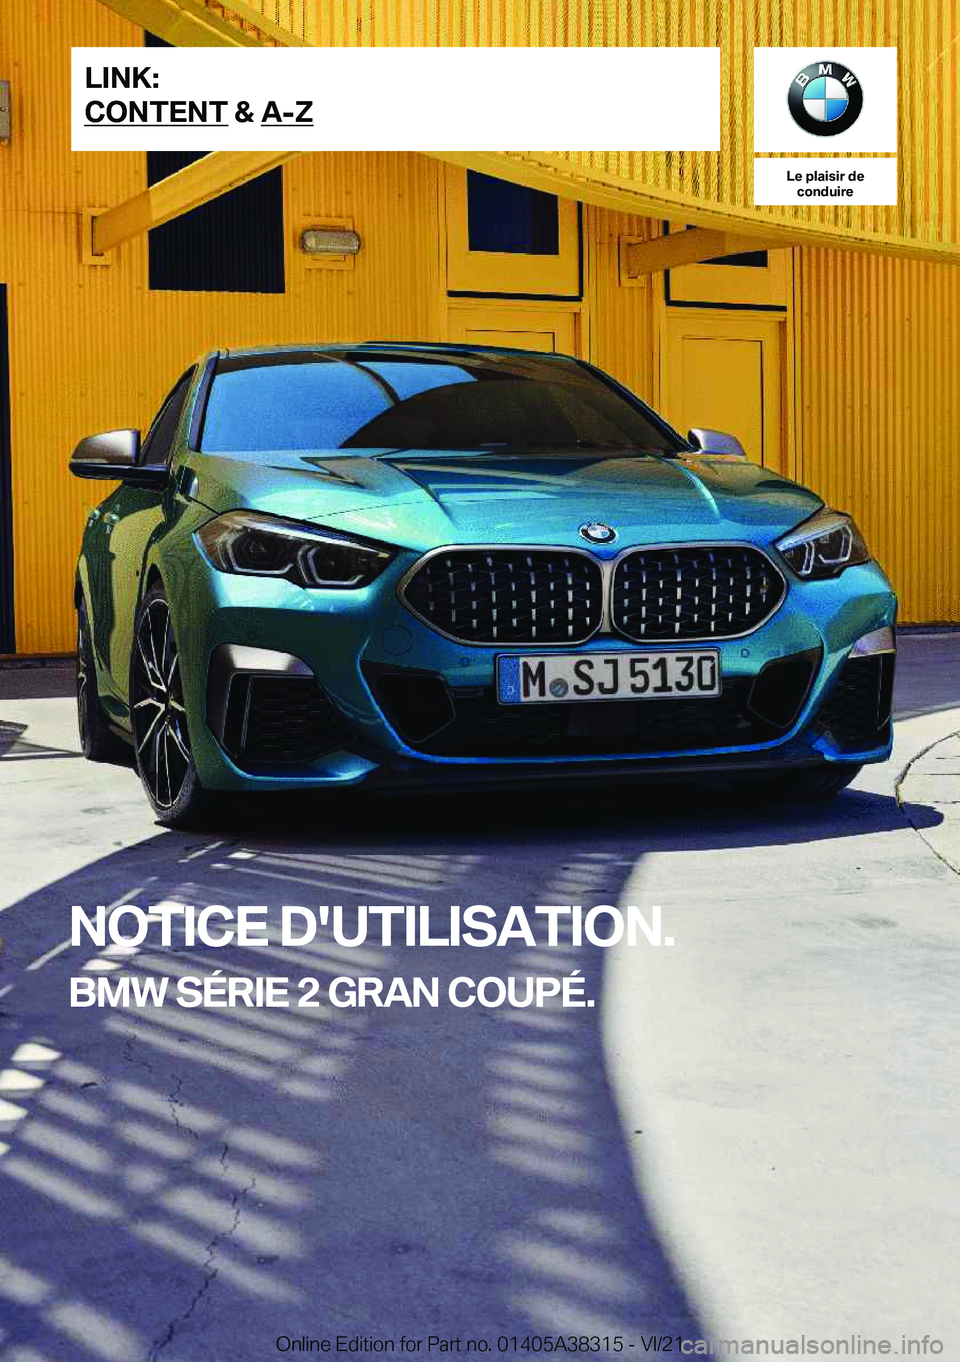 BMW 2 SERIES GRAN COUPE 2022  Notices Demploi (in French) �L�e��p�l�a�i�s�i�r��d�e�c�o�n�d�u�i�r�e
�N�O�T�I�C�E��D�'�U�T�I�L�I�S�A�T�I�O�N�.
�B�M�W��S�